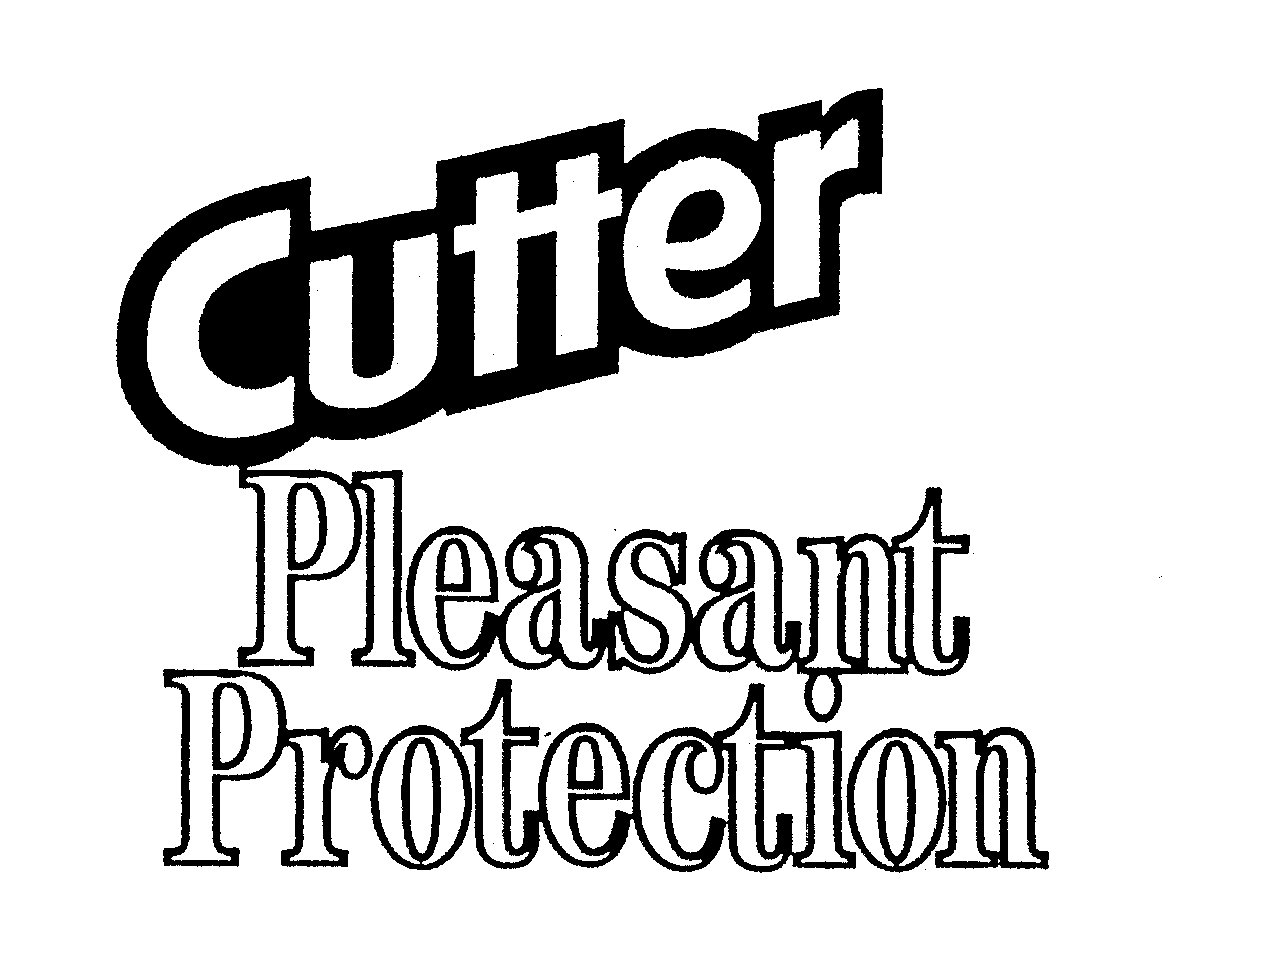 Trademark Logo CUTTER PLEASANT PROTECTION